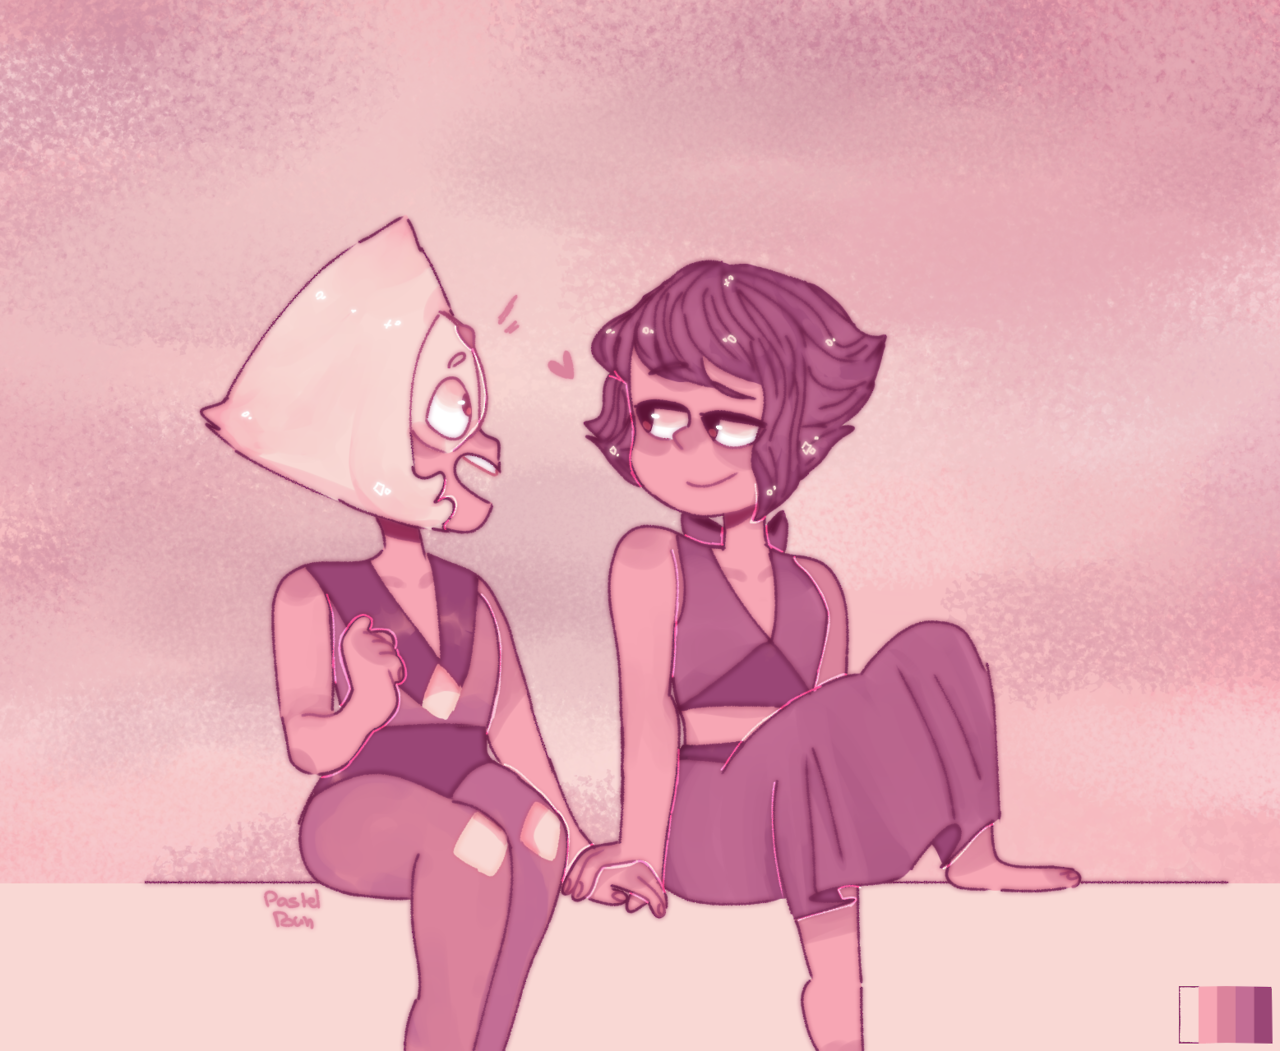 lapis listening to her gf in shades of pink (i dont have creativity for a good caption im sorry)